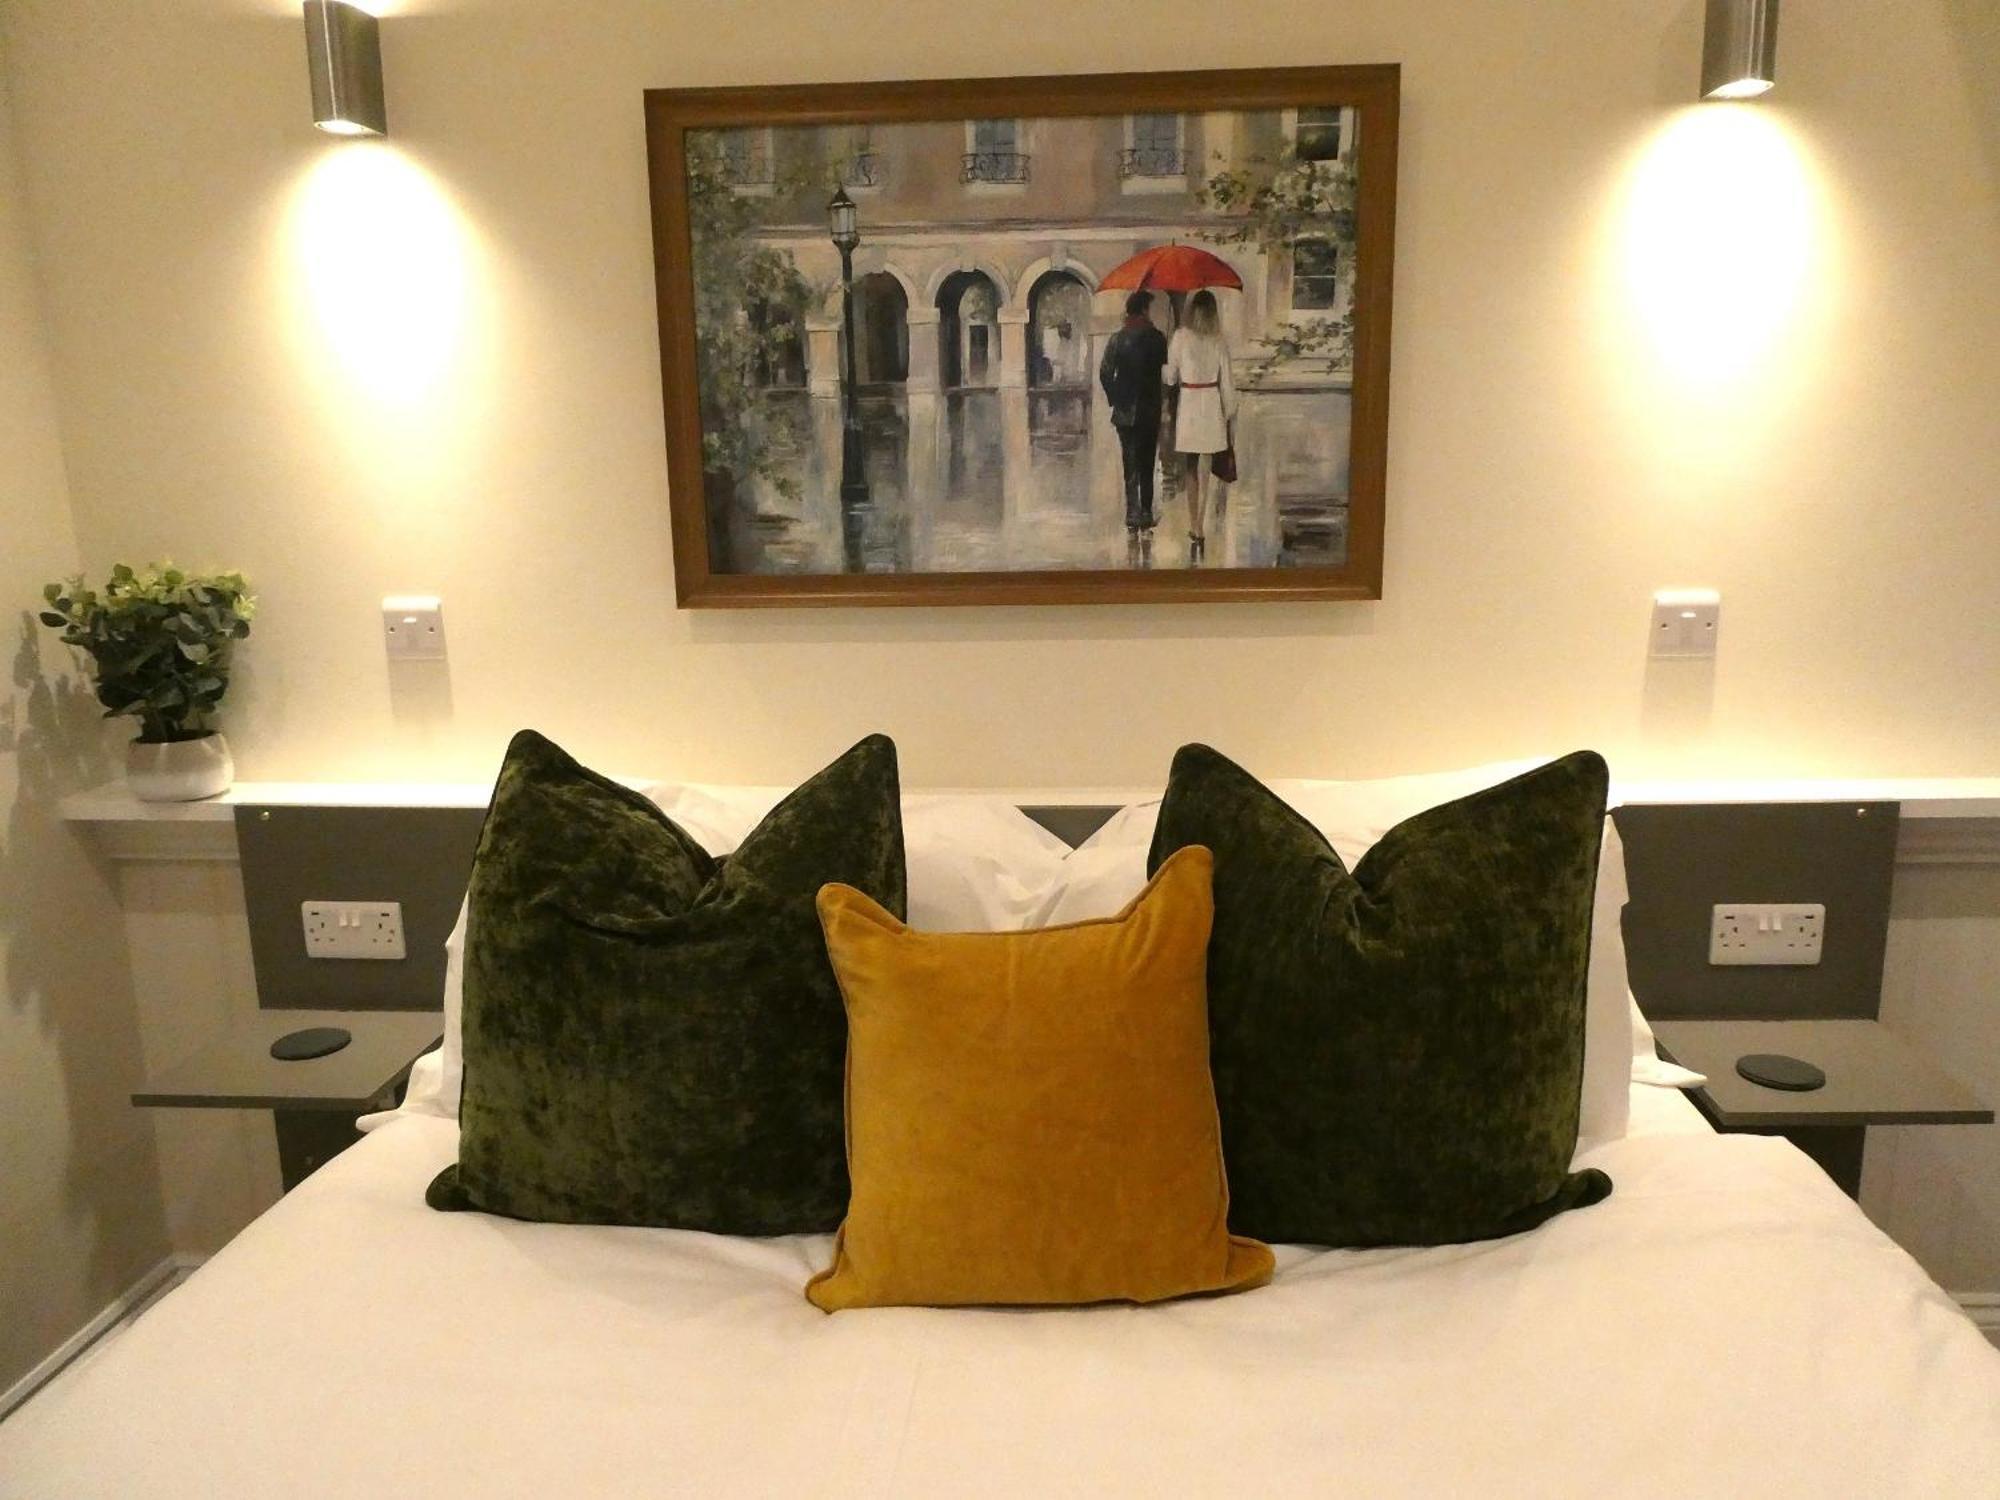 The Frocester Stonehouse  Zimmer foto